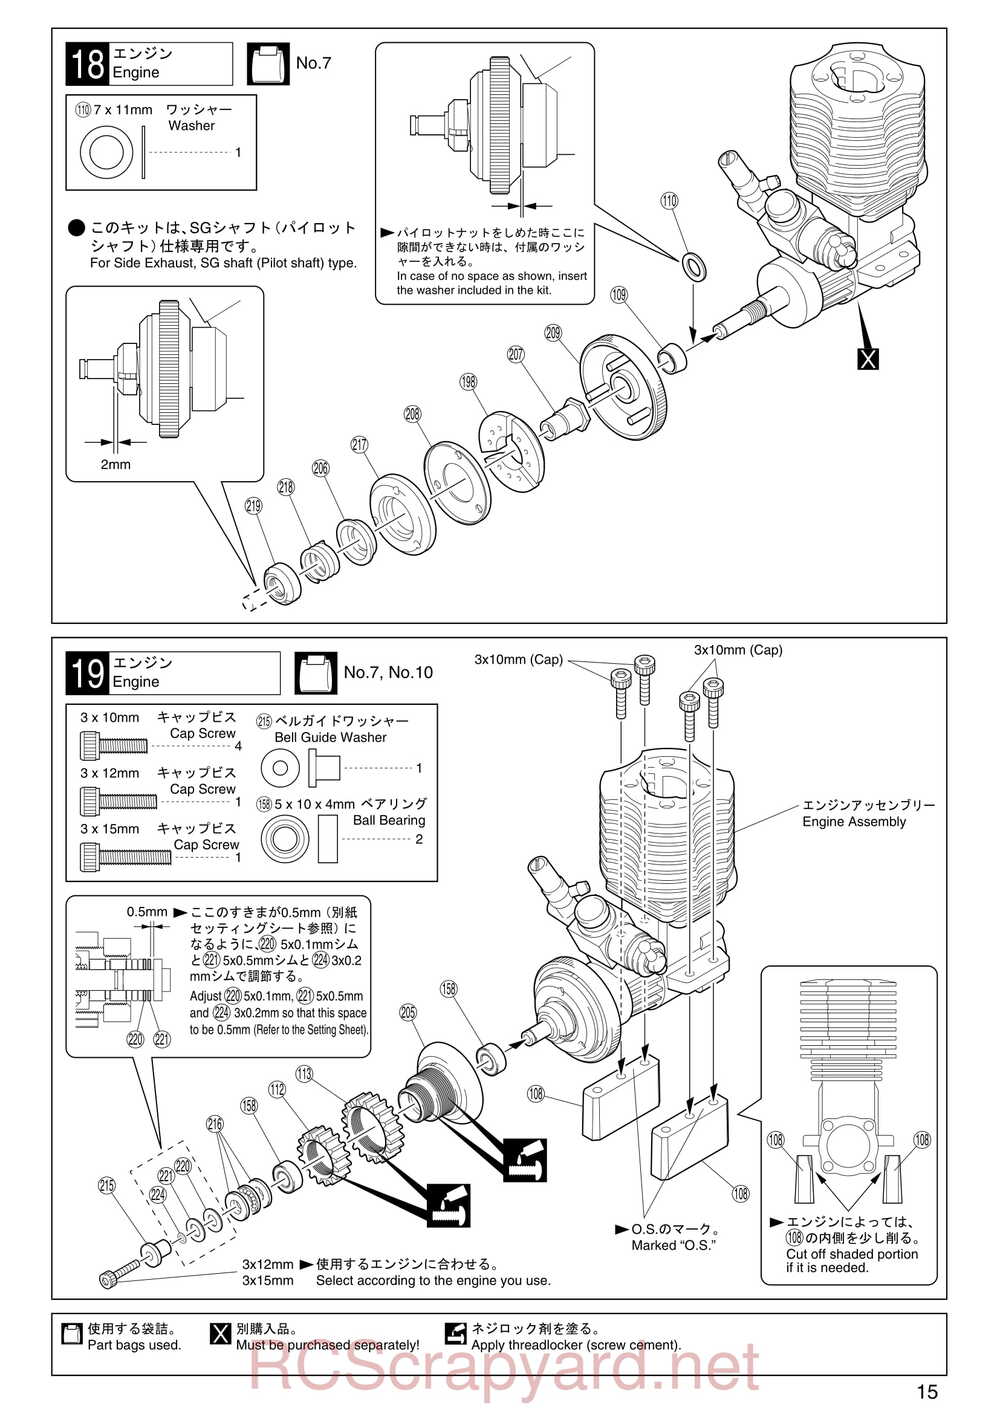 Kyosho - 31102 - V-One RR - Manual - Page 15